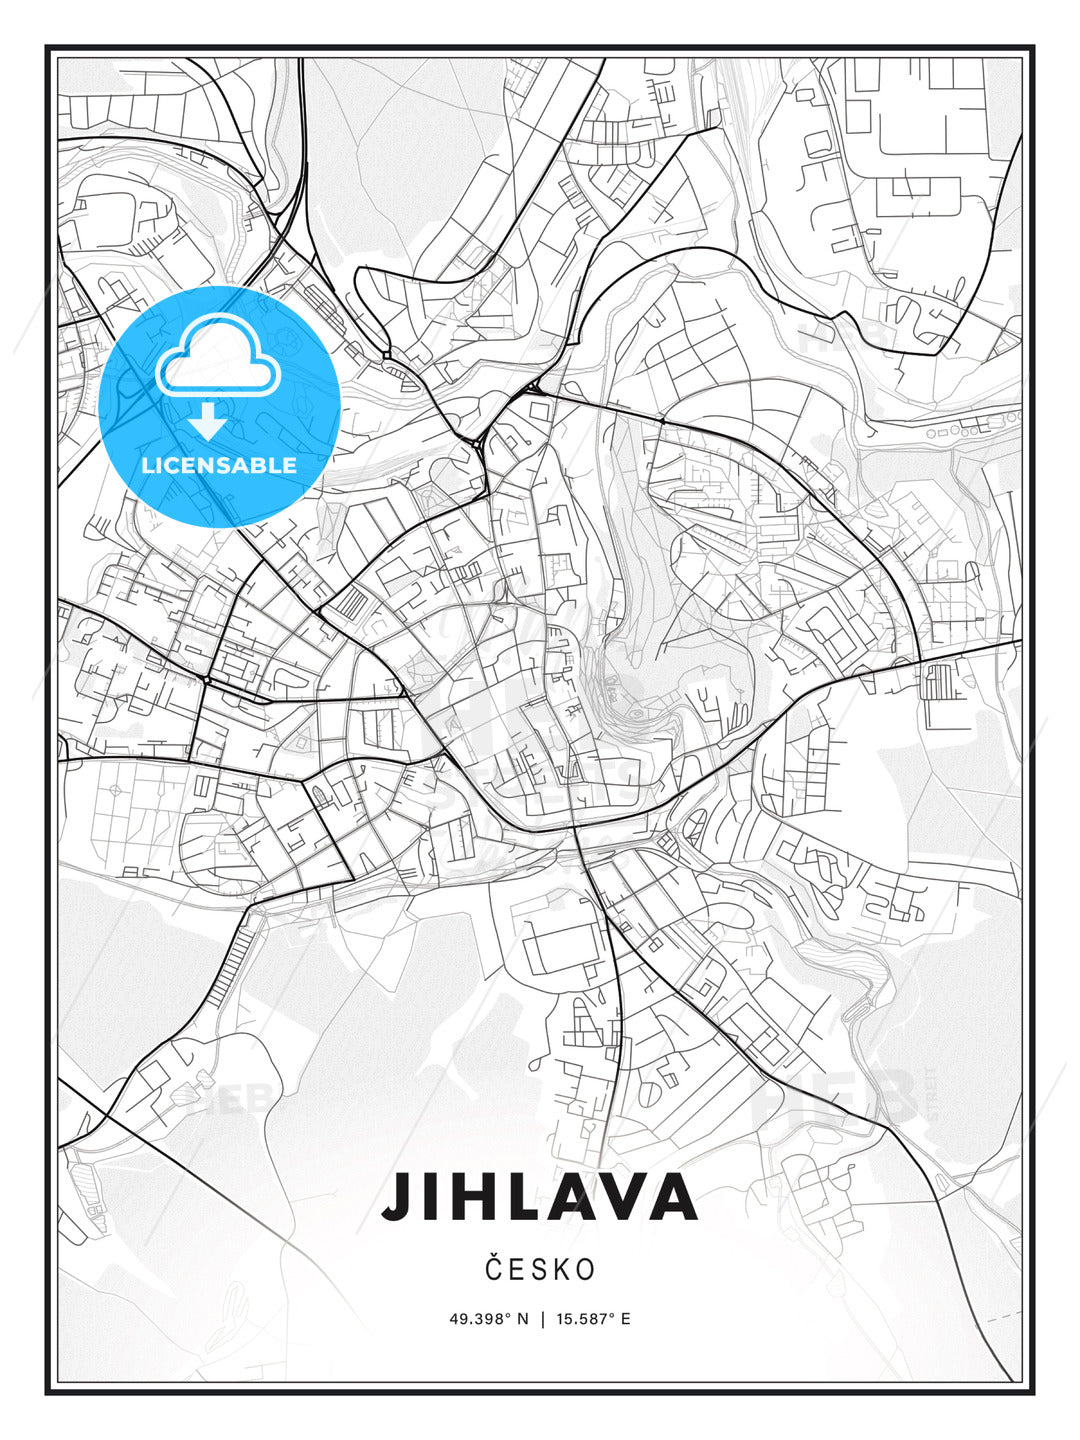 Jihlava, Czechia, Modern Print Template in Various Formats - HEBSTREITS Sketches